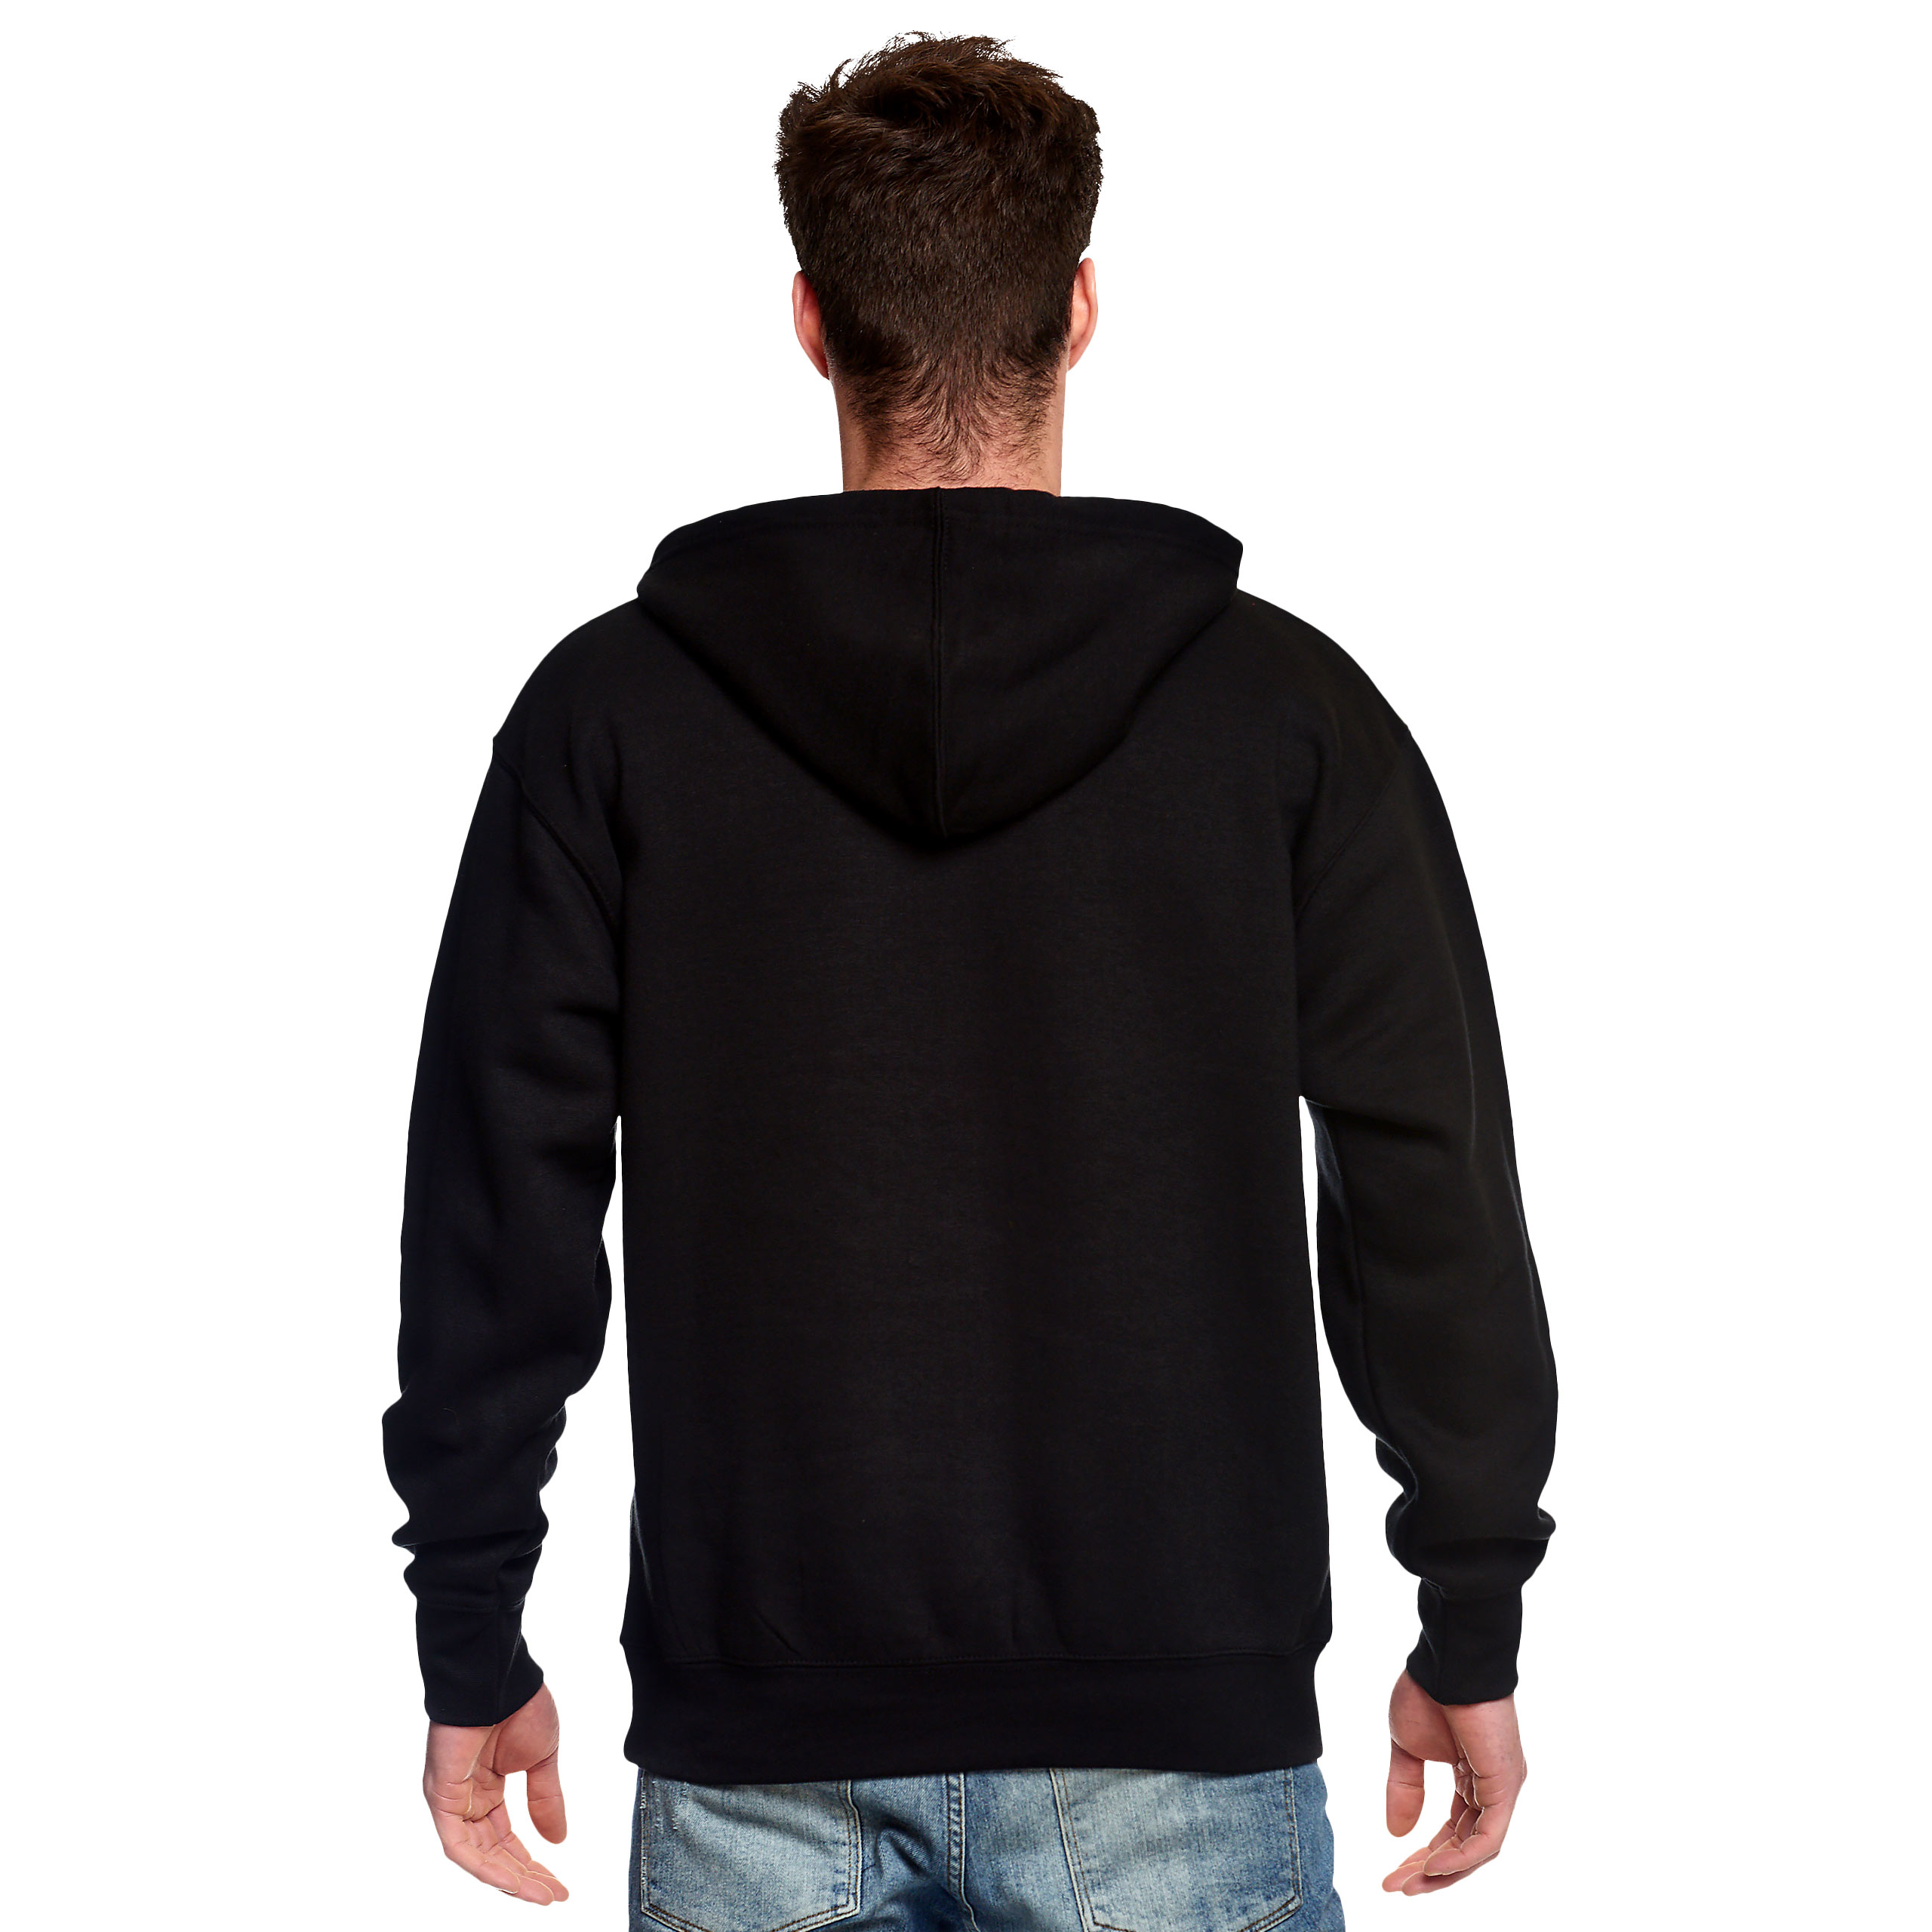 Lord of the Rings - The One Ring Hoodie Black